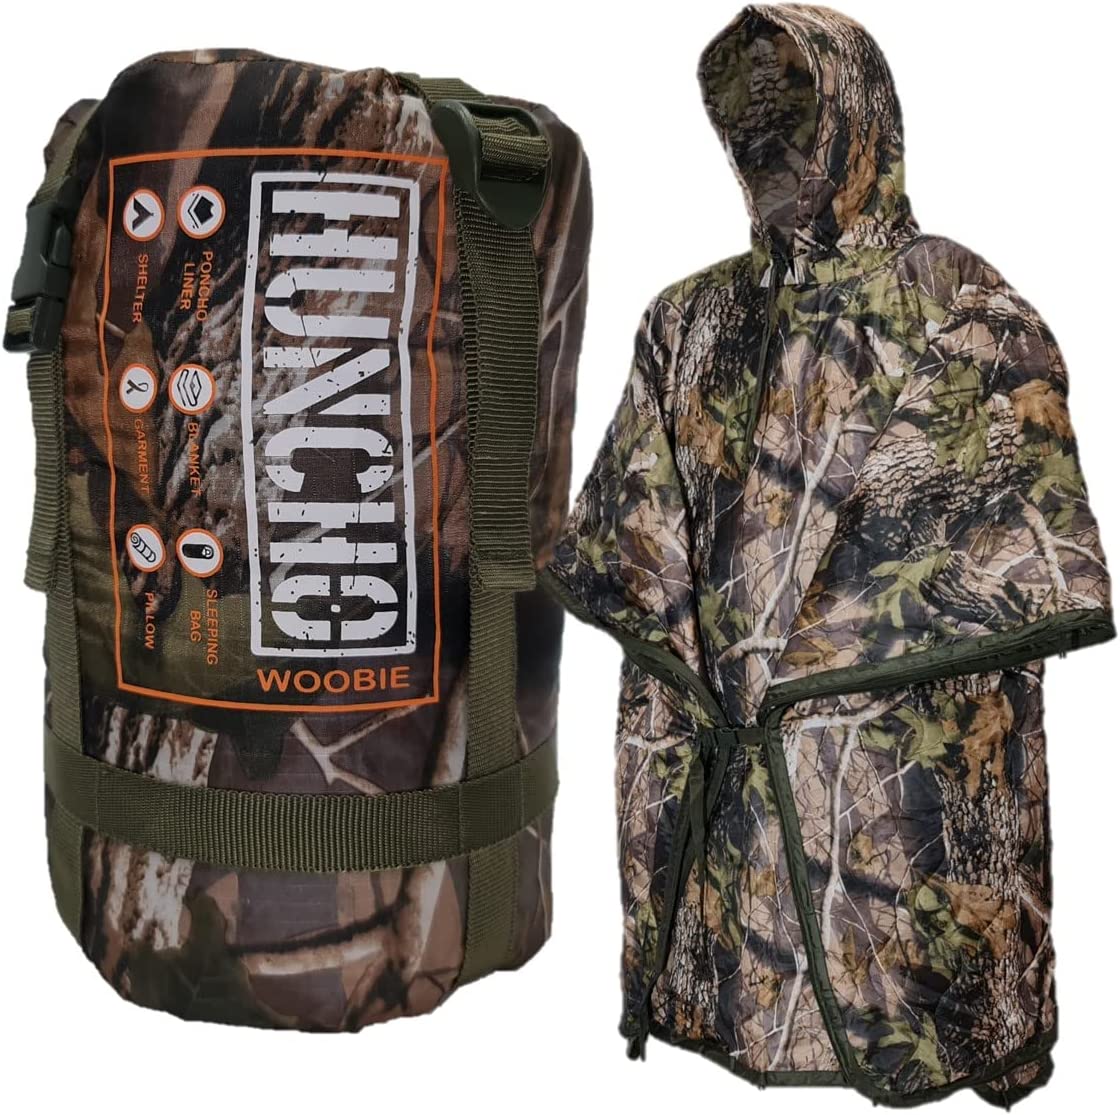 Woobie Poncho Liner for Rain Poncho for Men, Realtree Camouflage with Carry Pack – Camo Poncho Liner with Zipper, Large and Wide Hoodie, Tie Cords – Premium Hunting Gear